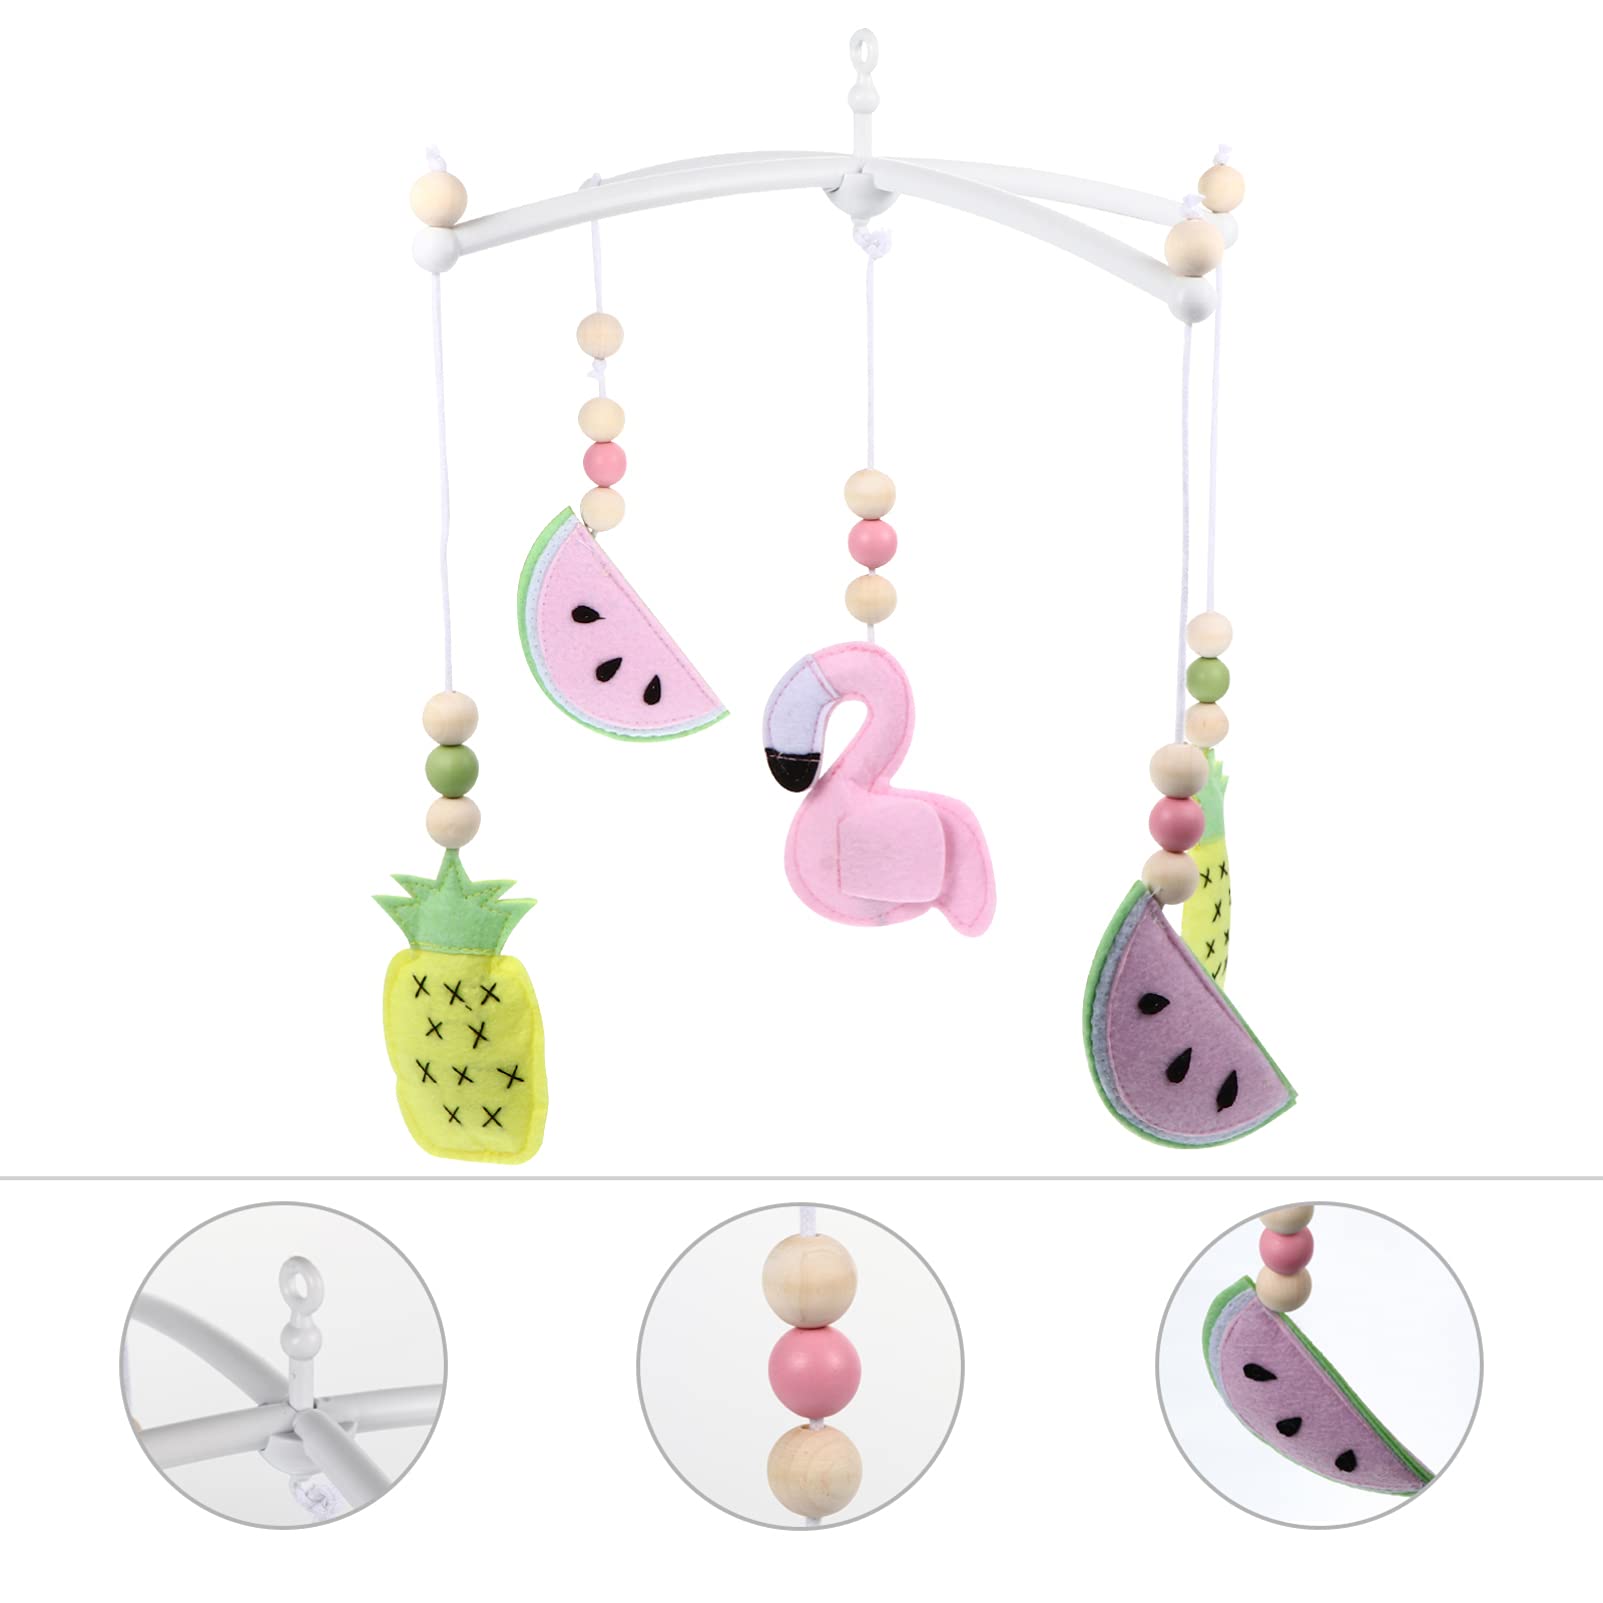 TOYANDONA Felt Baby Crib Mobile Flamingo Watermelon Hanging Car Seat Toy Wind Chime Nursery Decoration for Boys and Girls Baby Bedroom Ceiling Decor Mixed Color